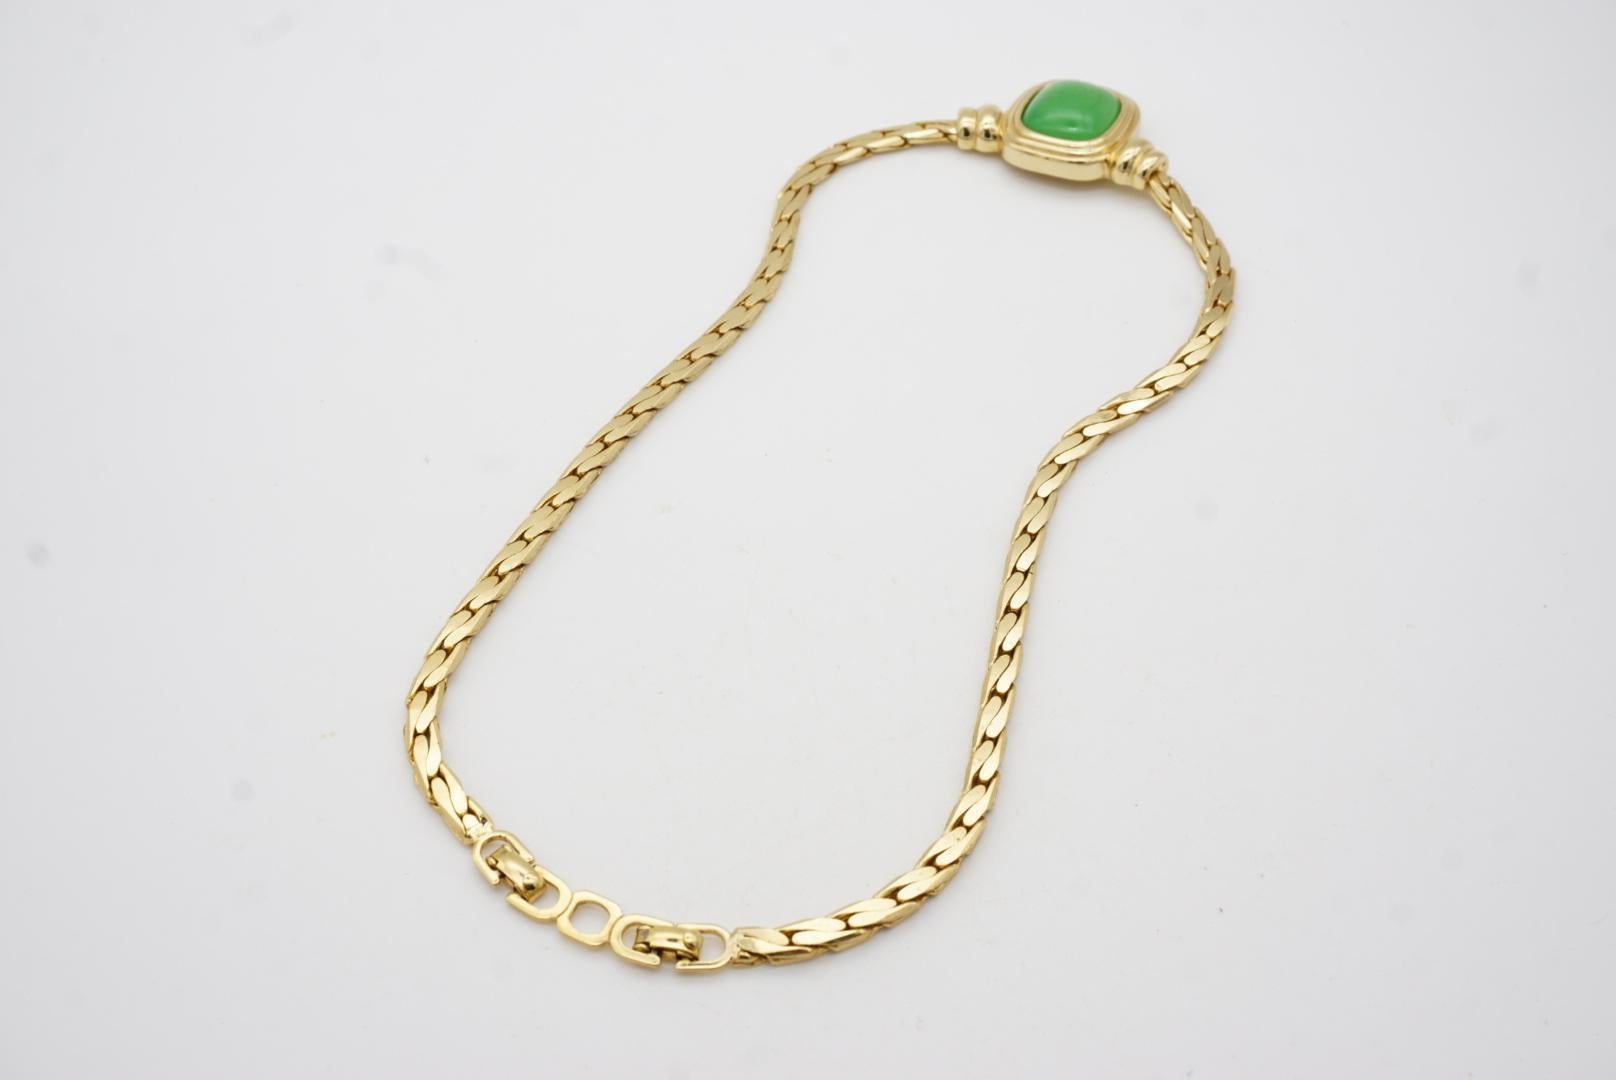 Christian Dior Vintage 1980s Emerald Green Rectangle Cabochon Pendant Necklace For Sale 5